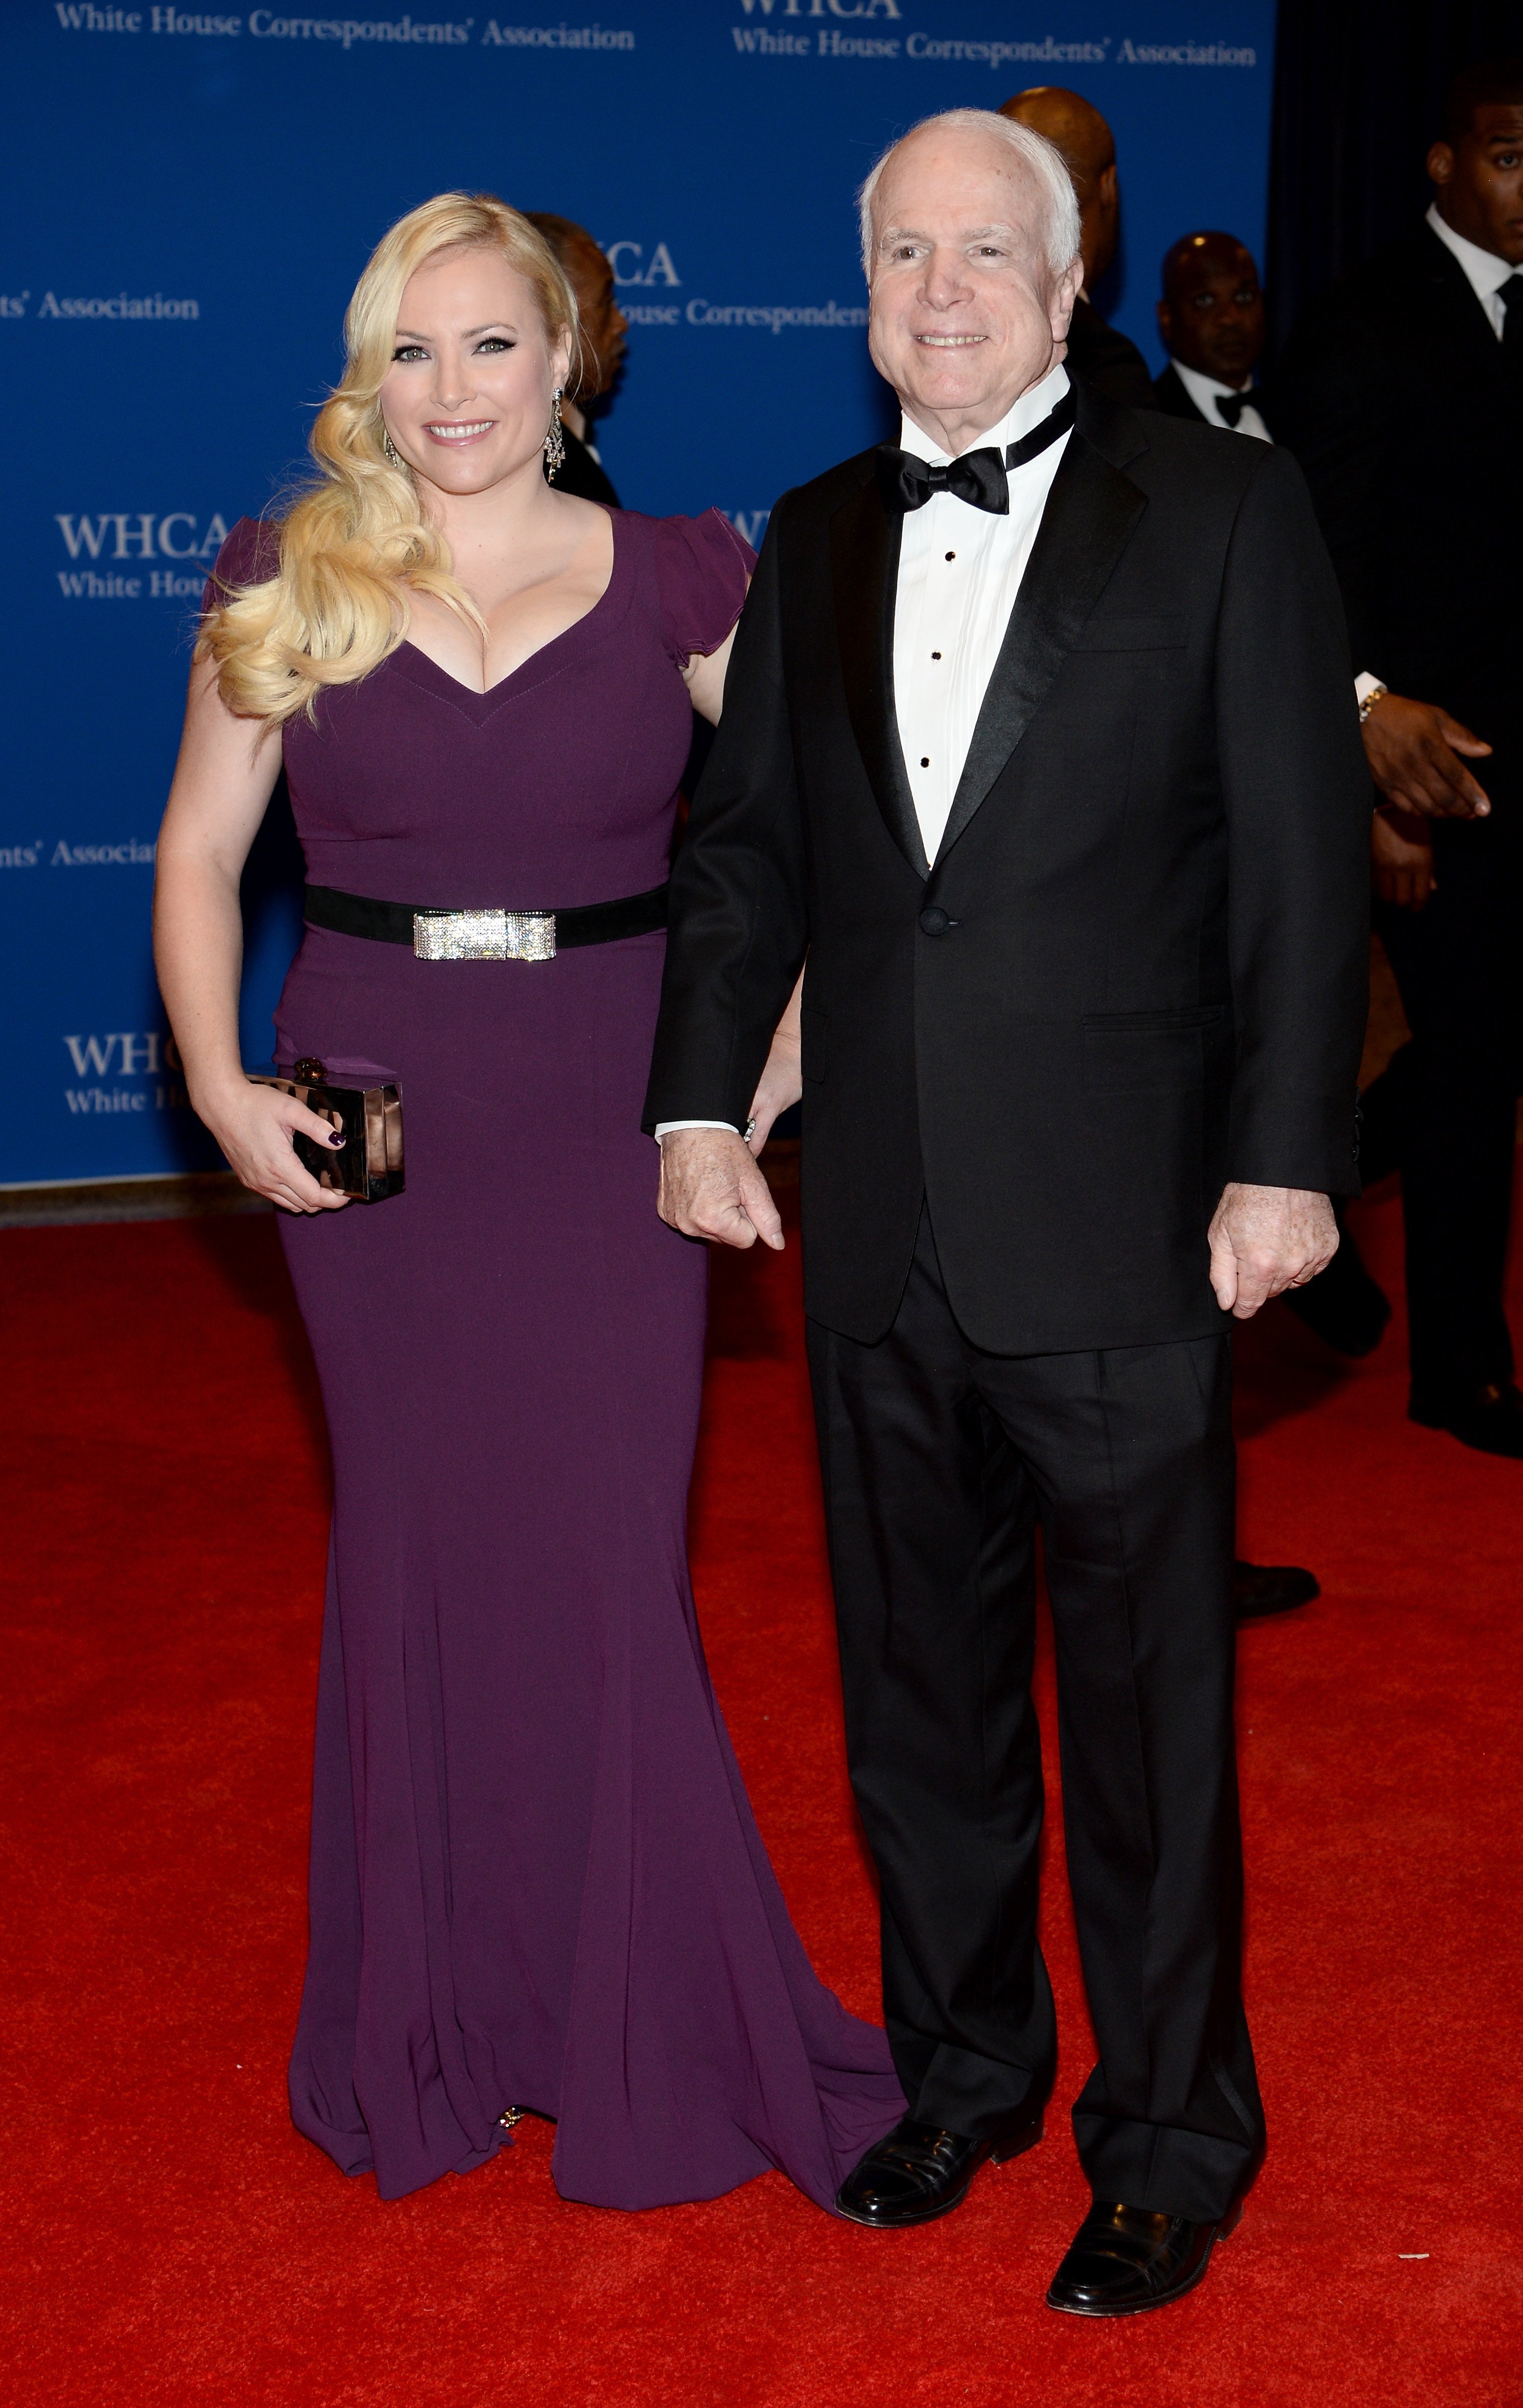 Meghan McCain and Senator John McCain at the 100th Annual White House Correspondents' Association Dinner at the Washington Hilton on May 3, 2014 in Washington, DC | Photo: Getty Images